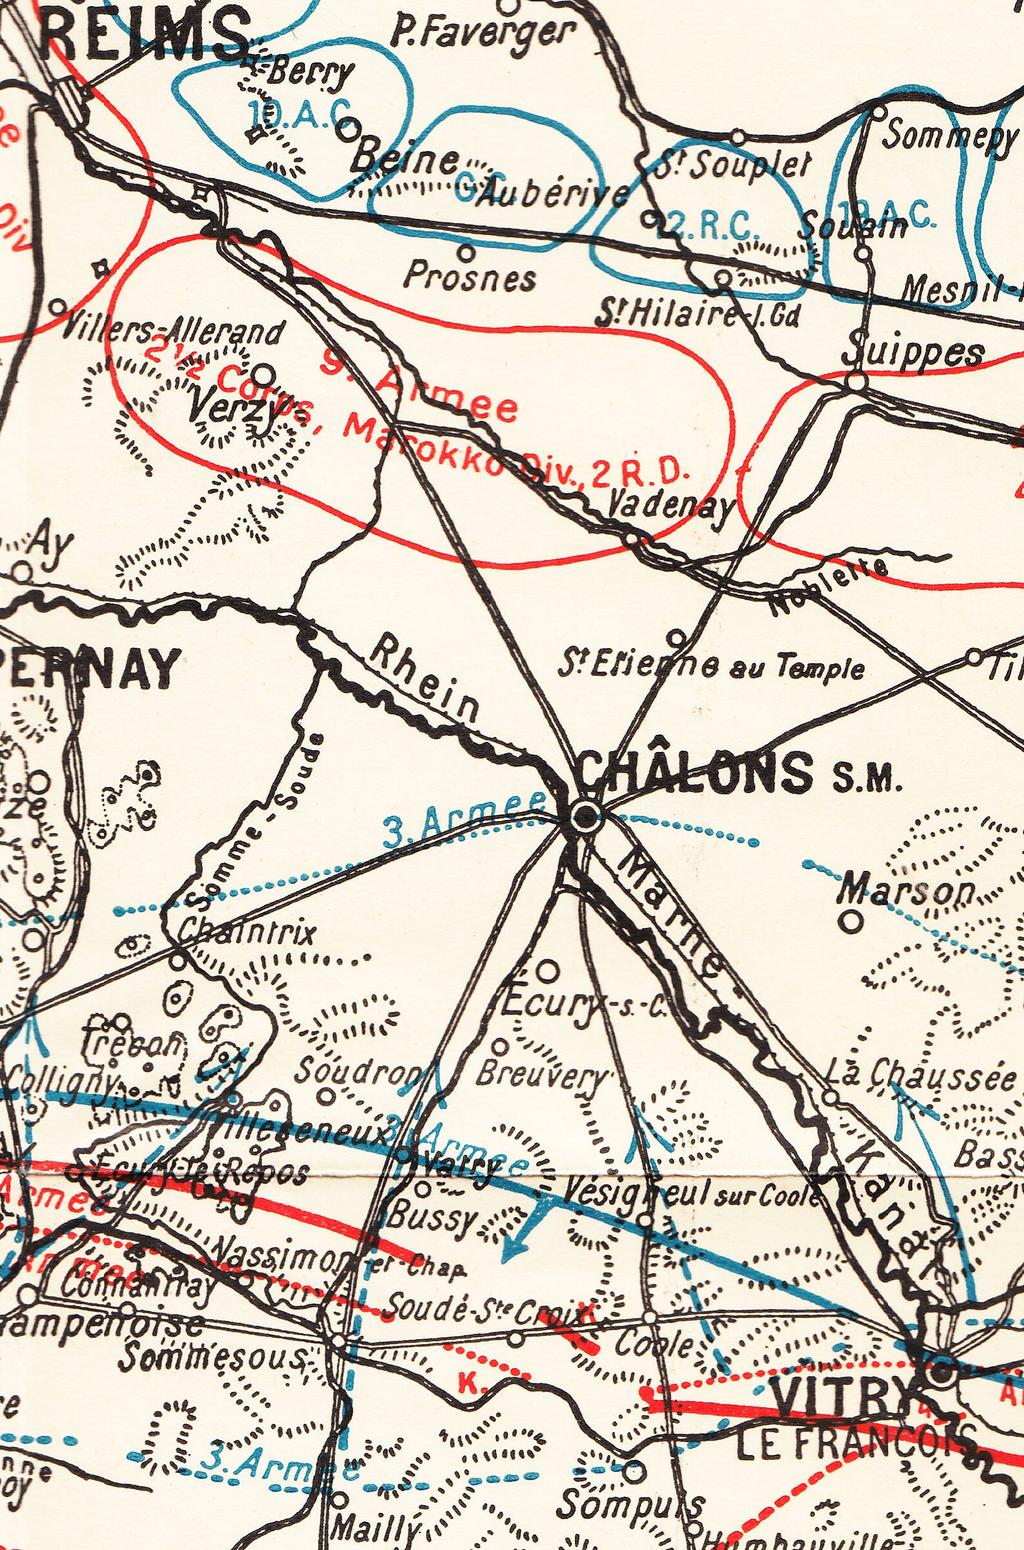 In September 1914, the Bonn battalion II/160 moved forward up to Vitry-le-François at the Marne where fierce fighting with the French ensued.